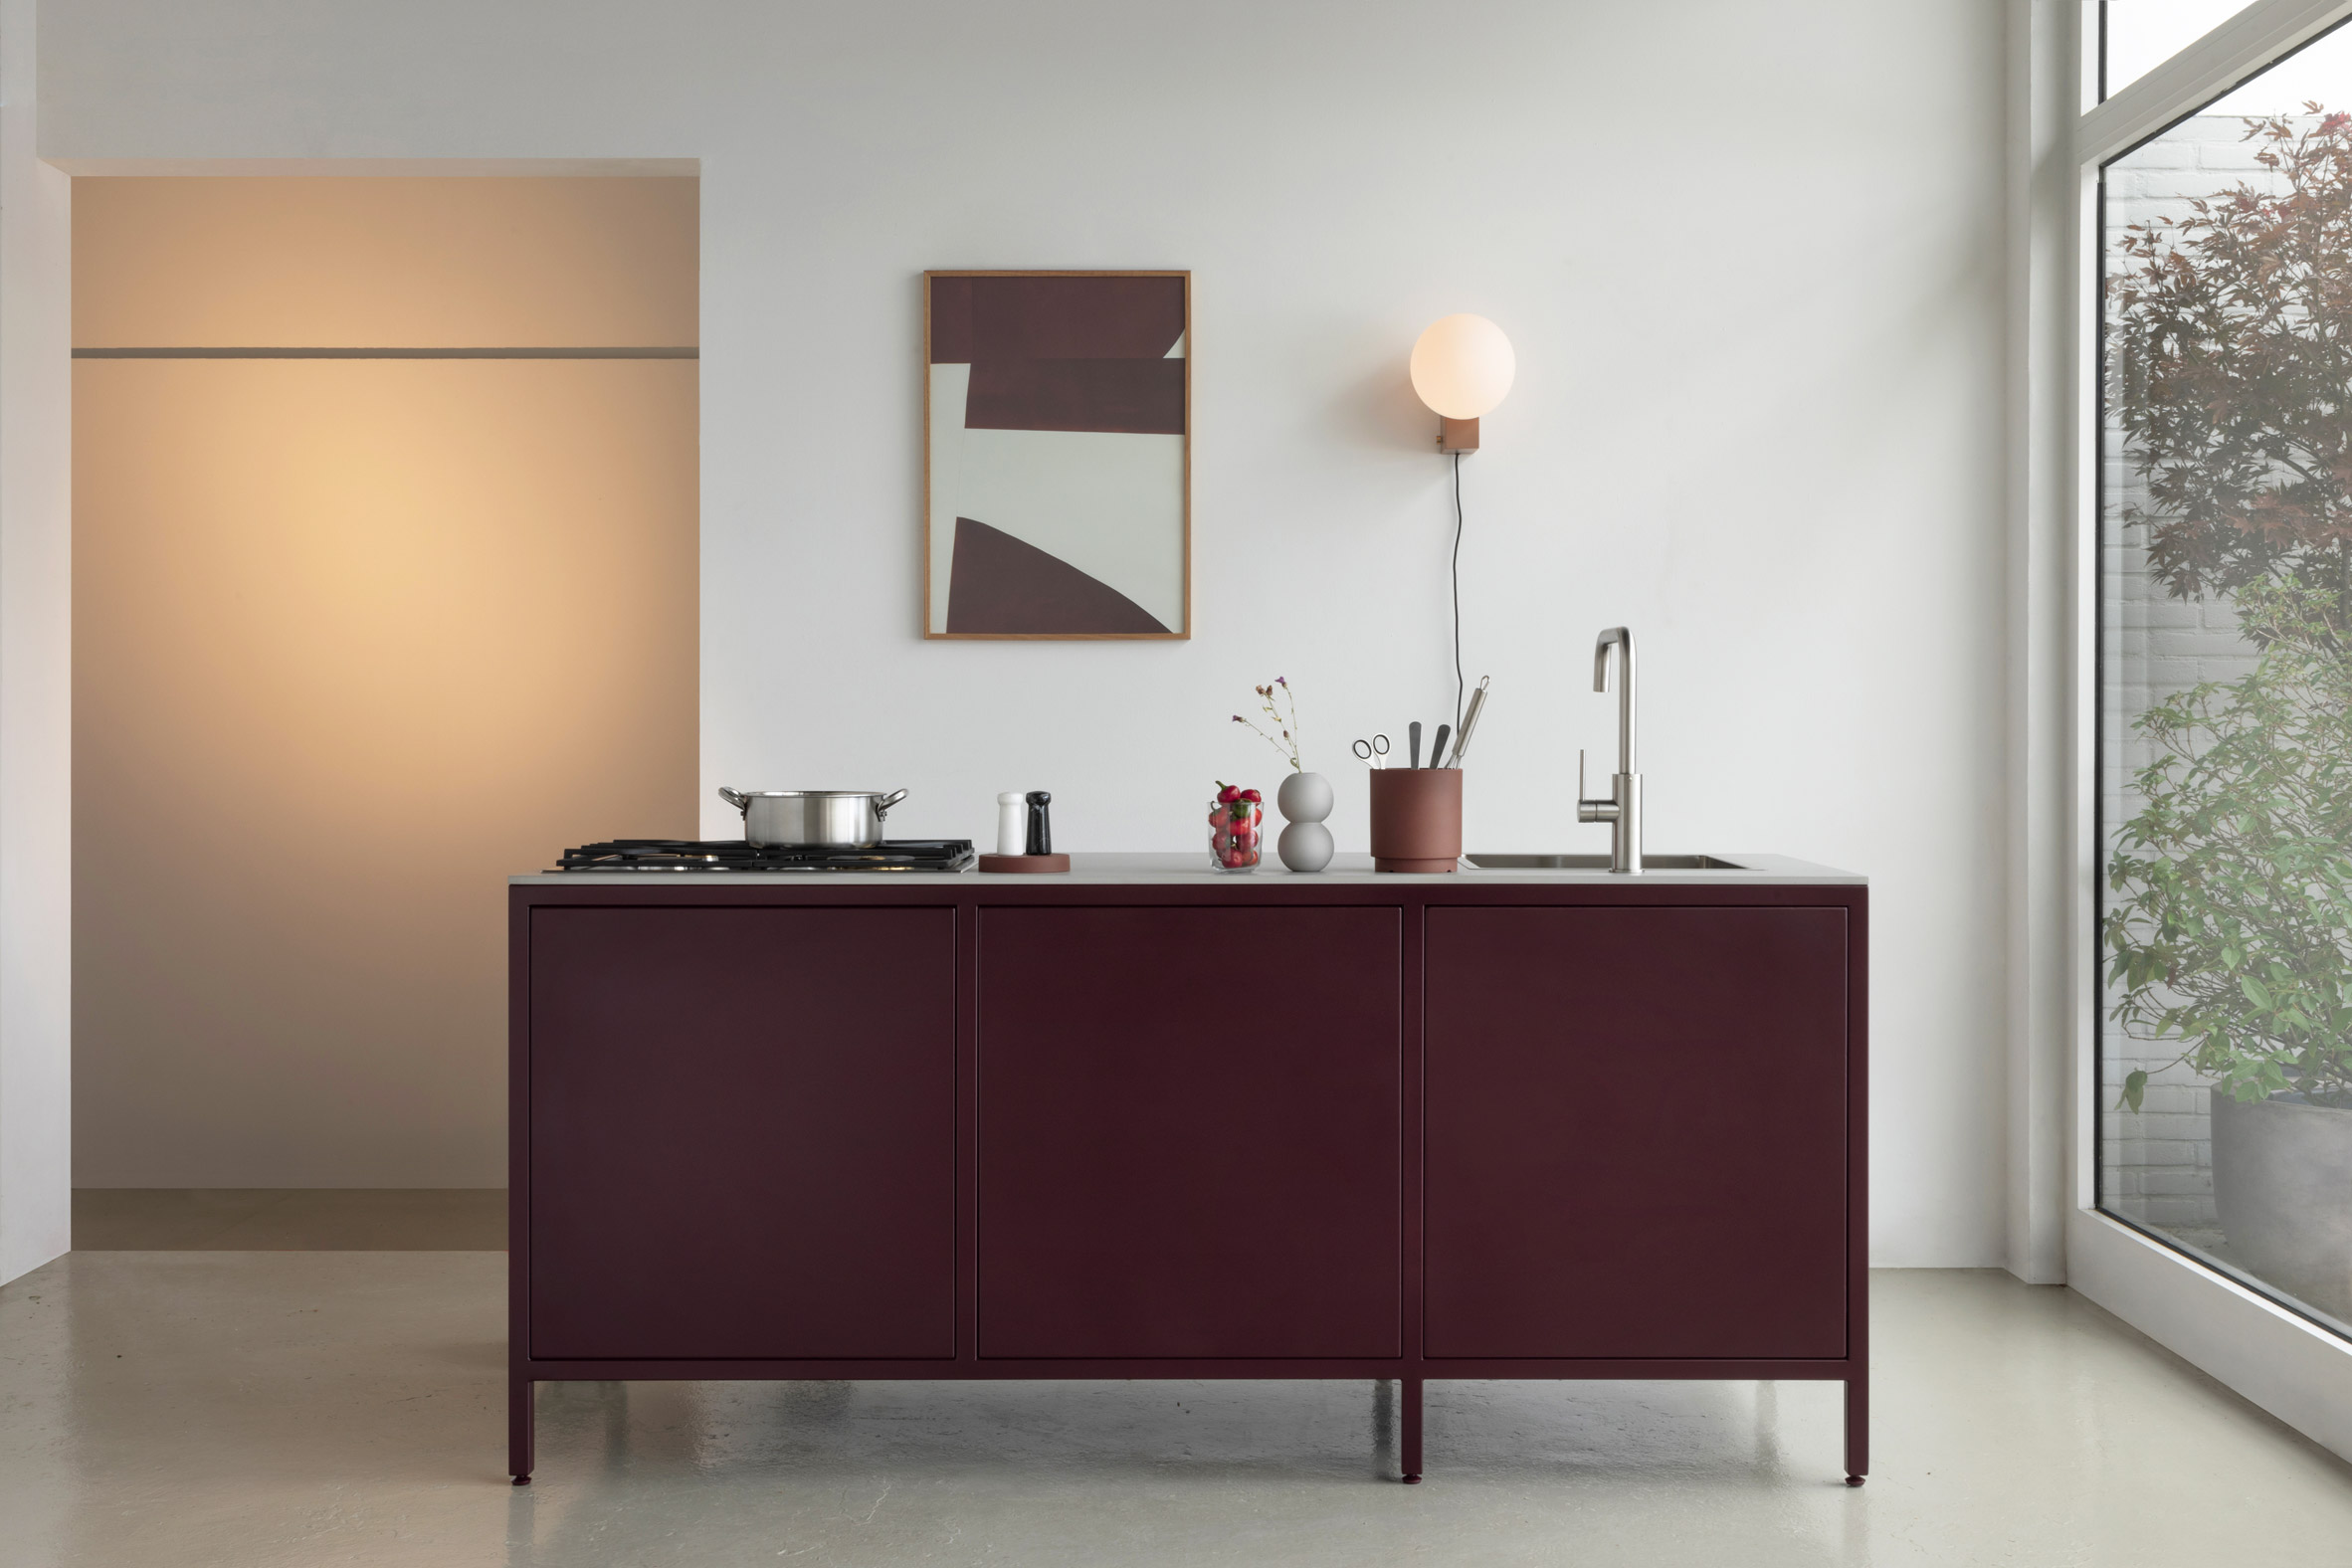 Burgundy kitchen unit in domestic space